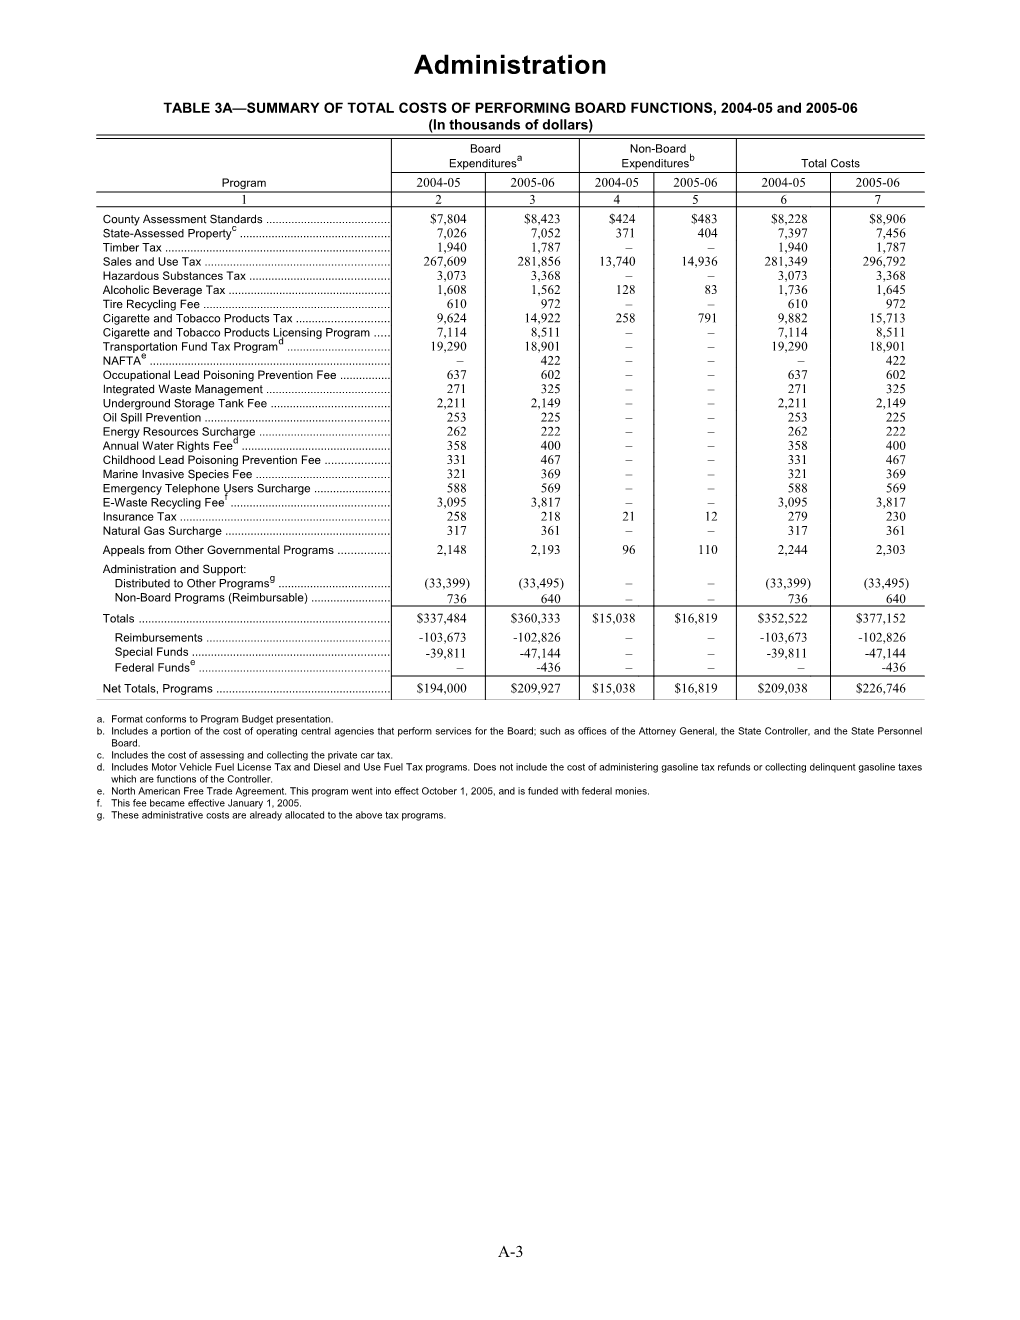 TABLE 3A SUMMARY of TOTAL COSTS of PERFORMING BOARD FUNCTIONS, 2004-05 and 2005-06